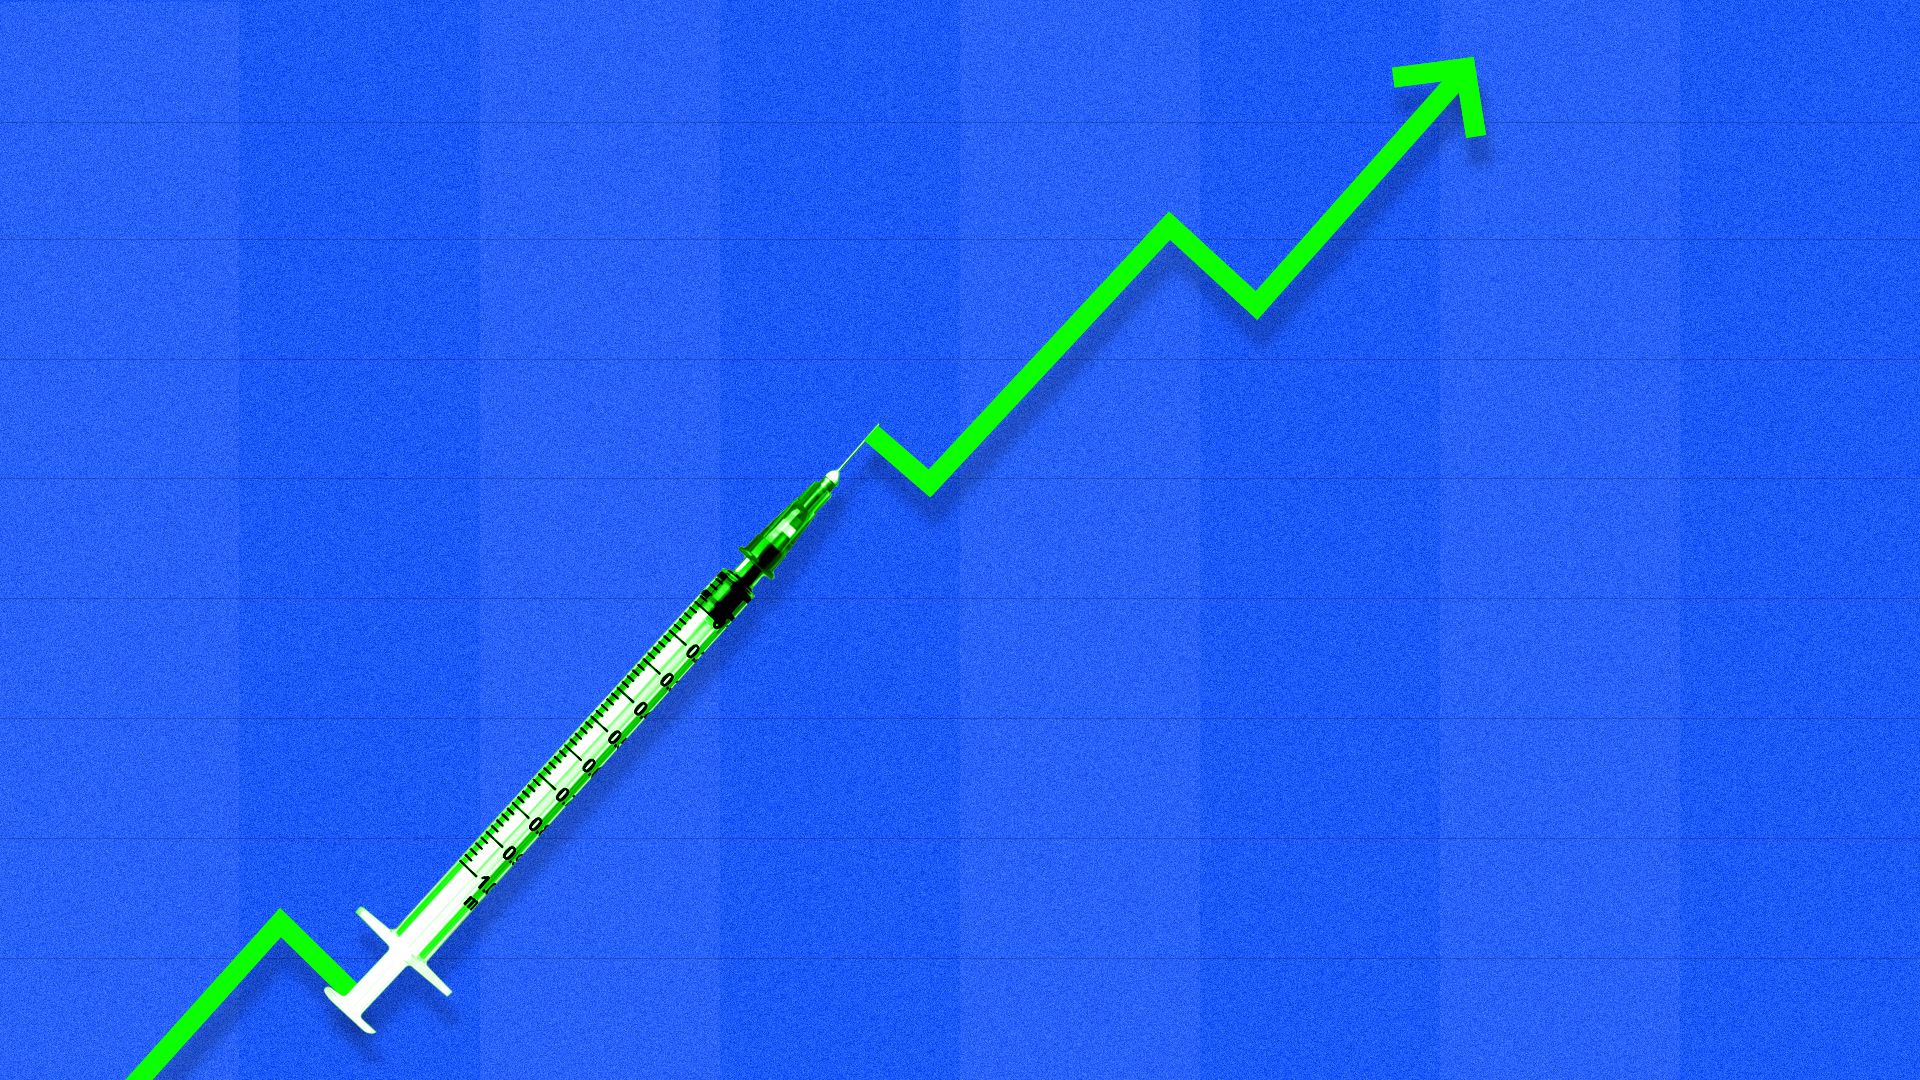 In this illustration, a needle forms part of an increasing green line that mimics a stock market line. 